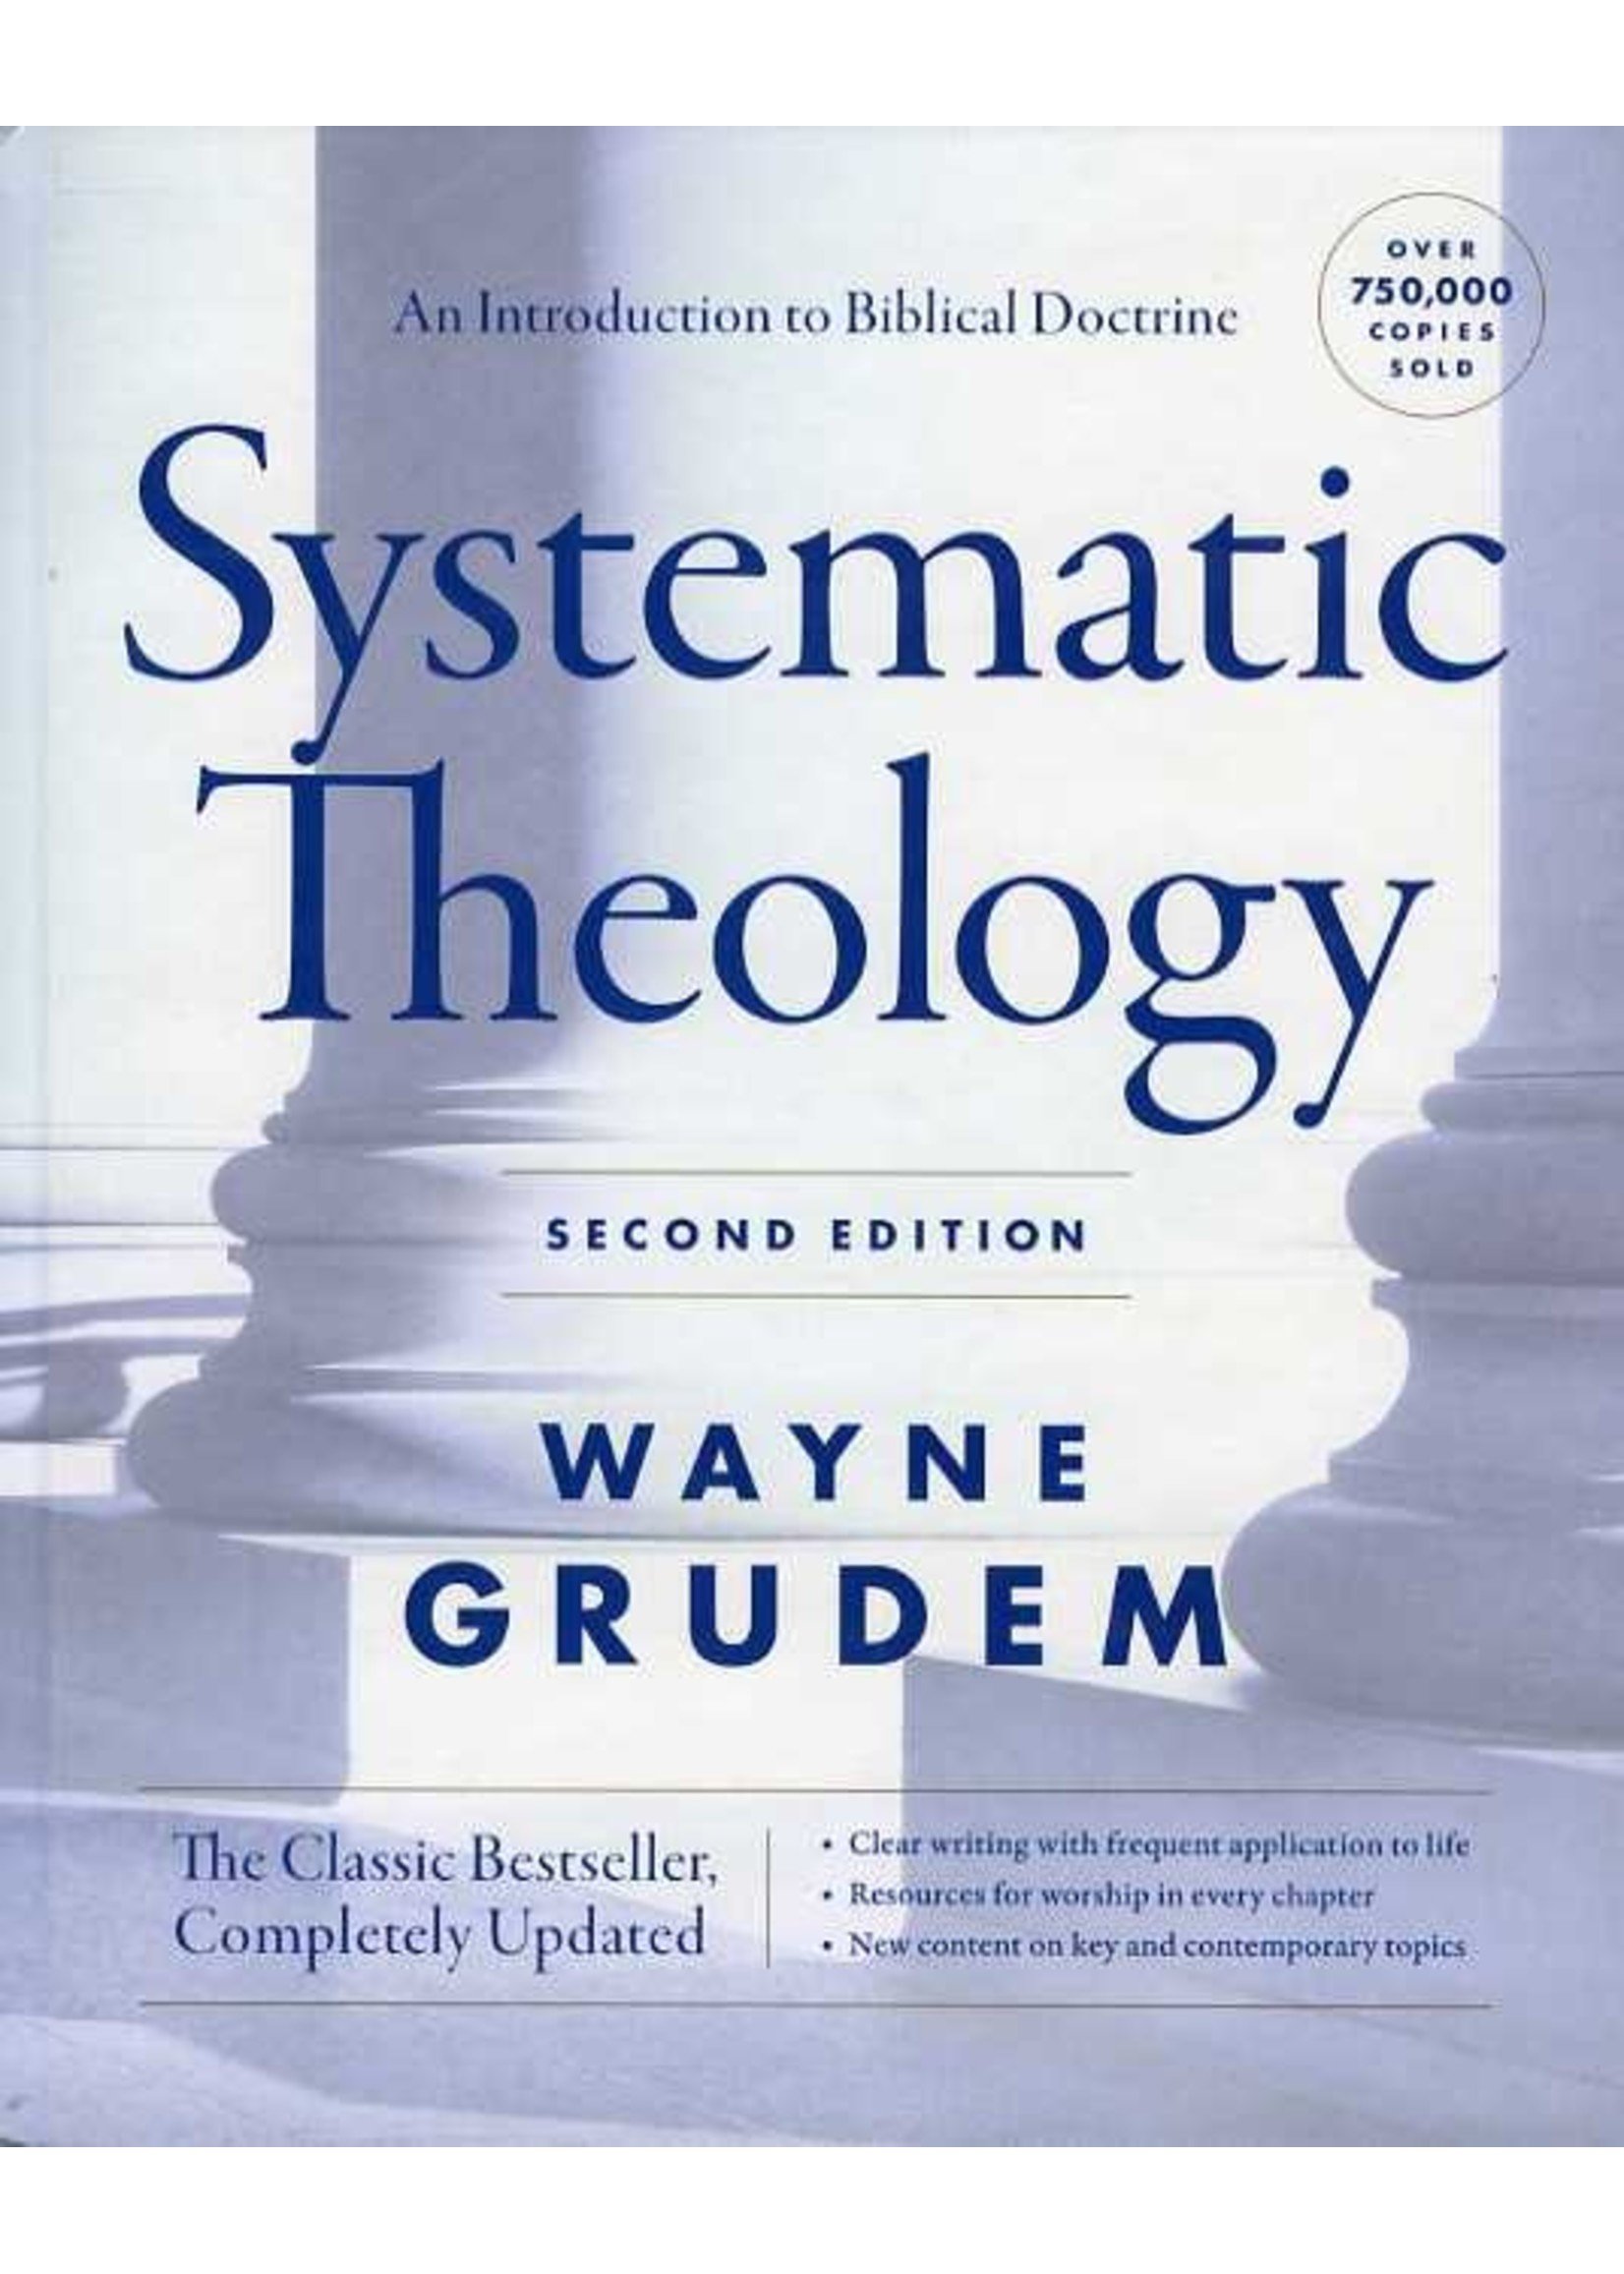 Zondervan Systematic Theology 2nd Edition - Wayne Grudem